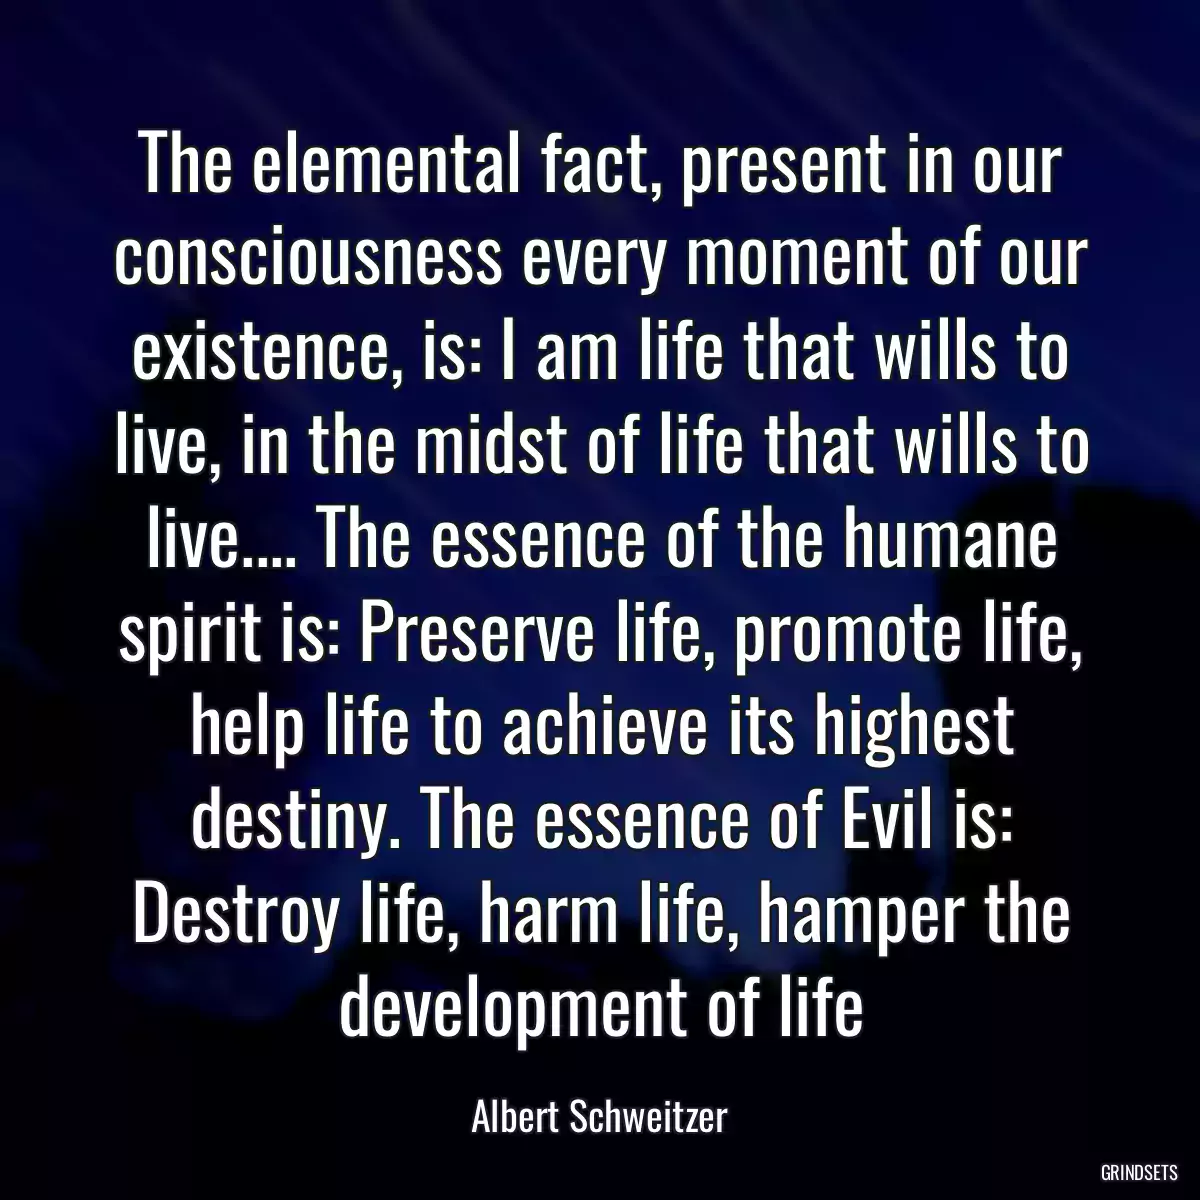 The elemental fact, present in our consciousness every moment of our existence, is: I am life that wills to live, in the midst of life that wills to live.... The essence of the humane spirit is: Preserve life, promote life, help life to achieve its highest destiny. The essence of Evil is: Destroy life, harm life, hamper the development of life